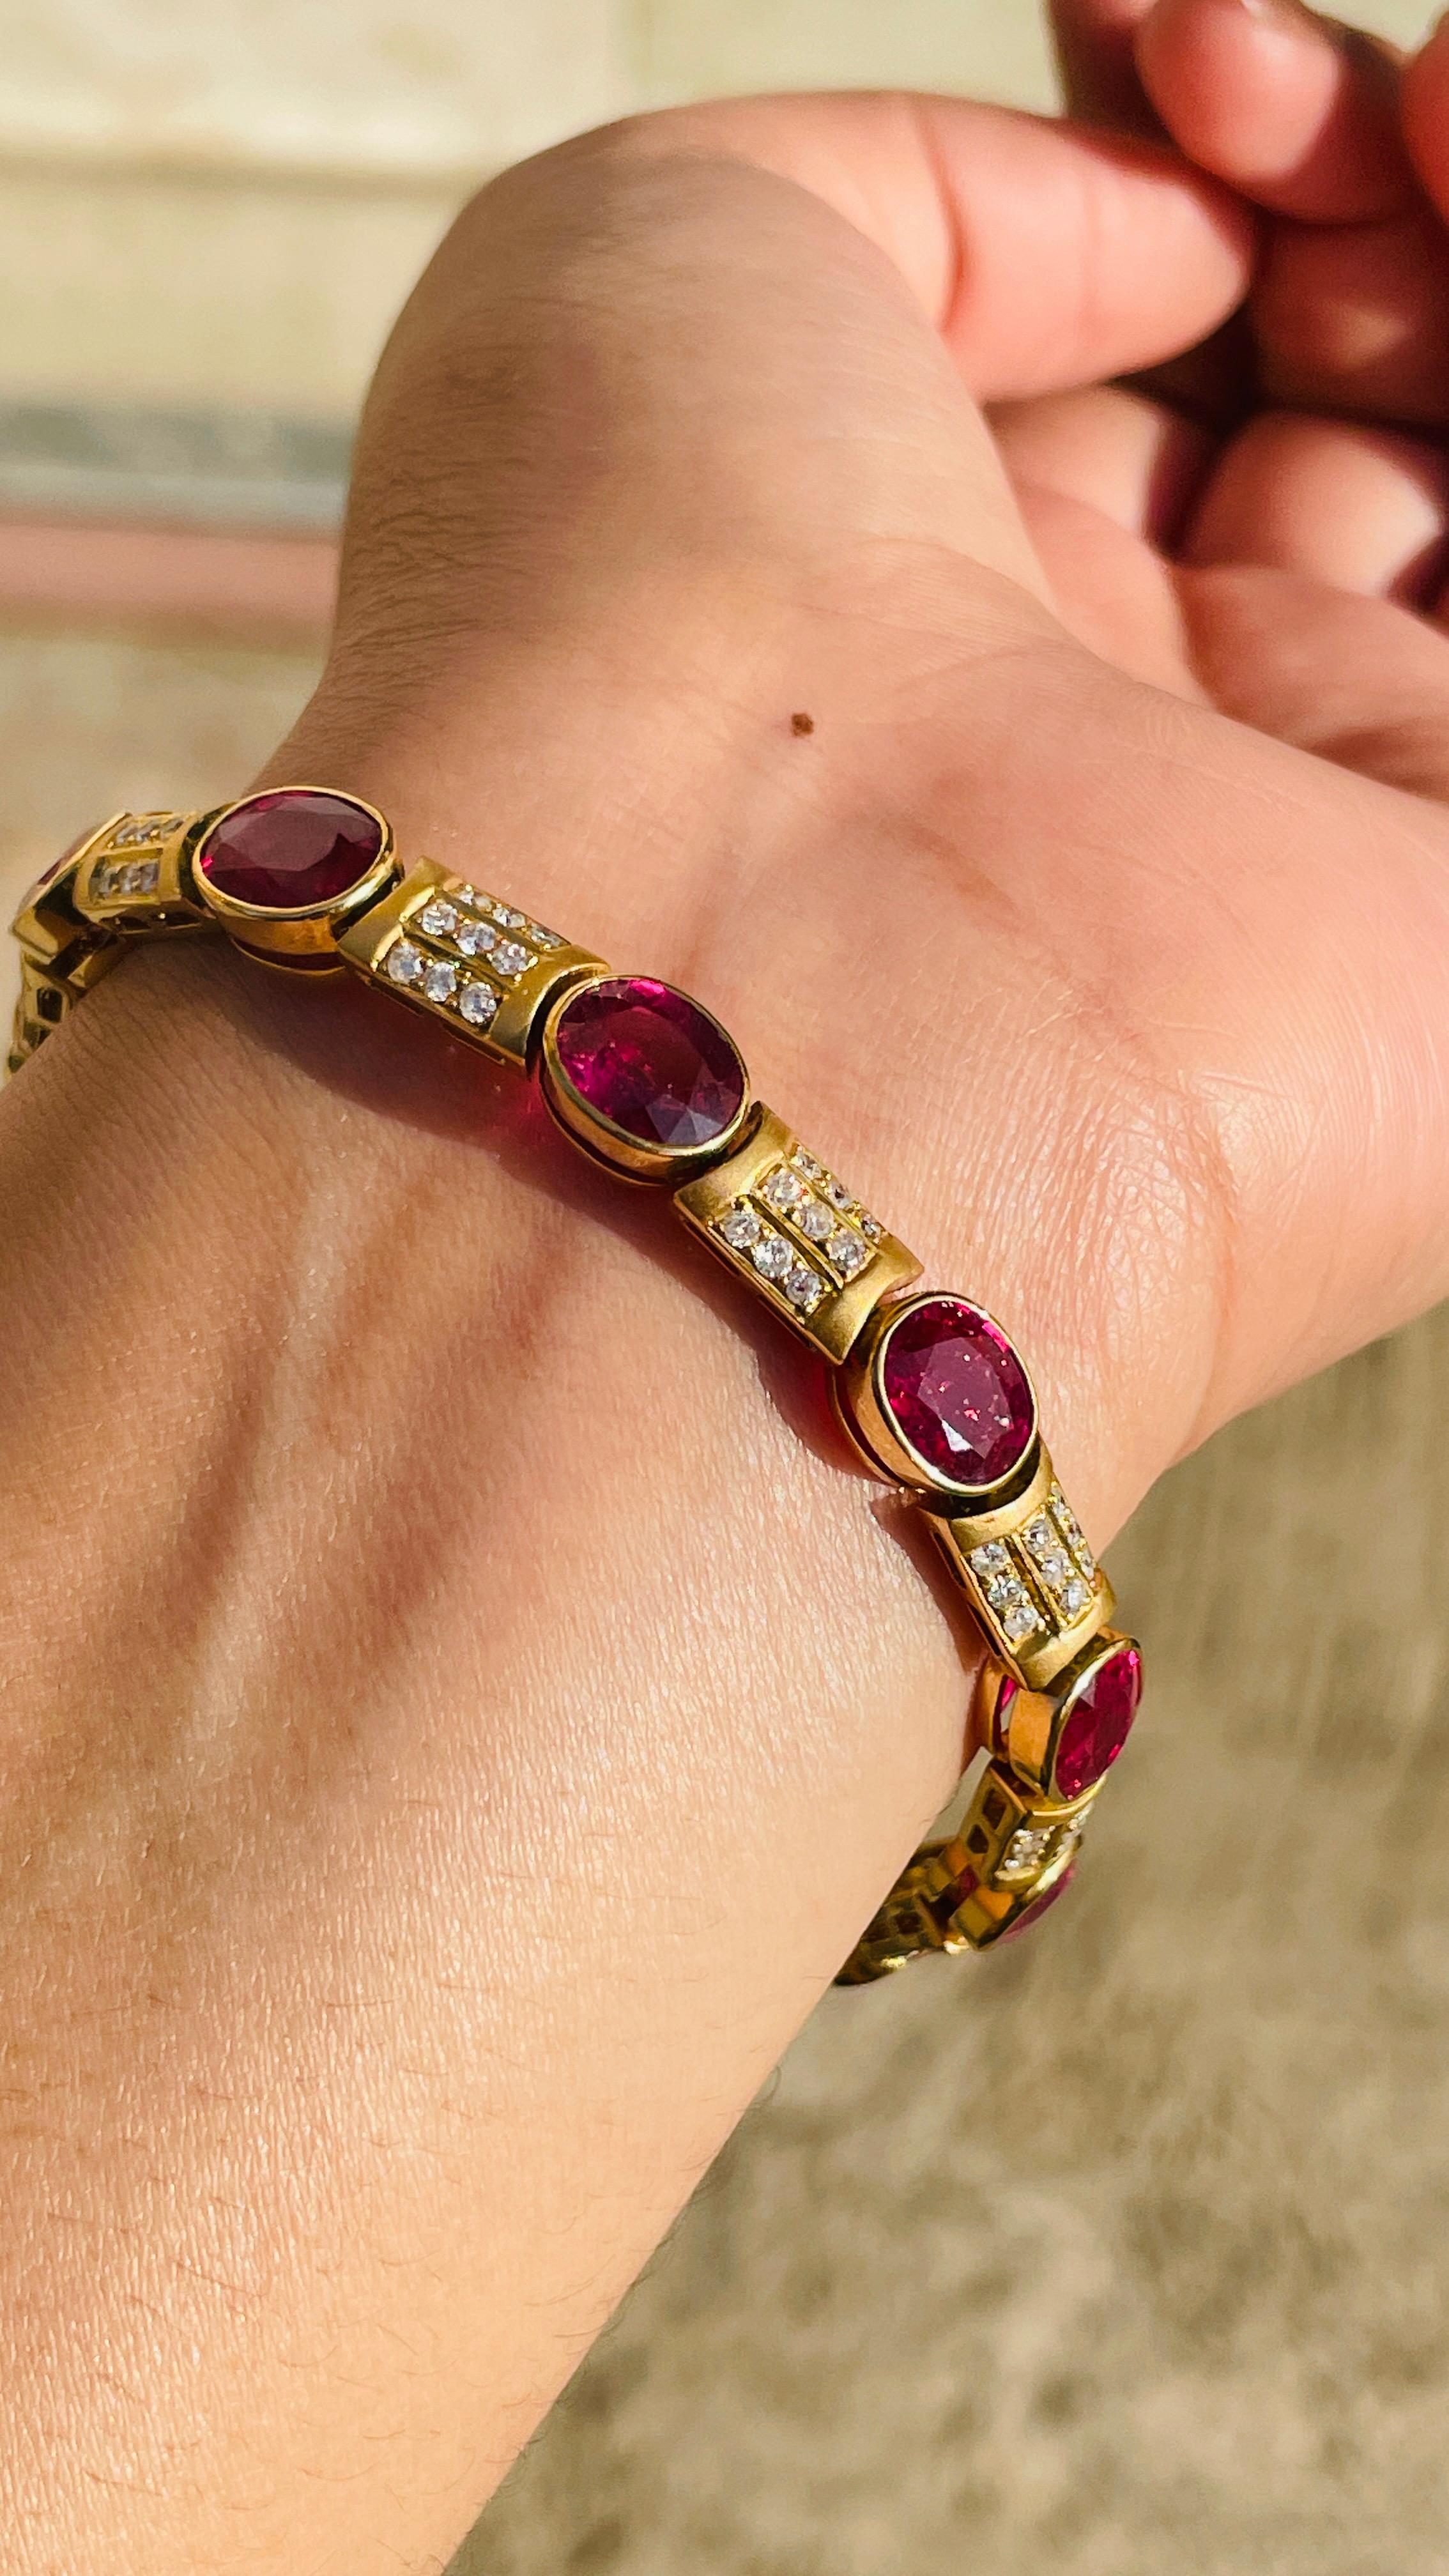 Ruby and Diamond bracelet in 18K Gold. It has a perfect oval cut gemstone to make you stand out on any occasion or an event.
A tennis bracelet is an essential piece of jewelry when it comes to your wedding day. The sleek and elegant style